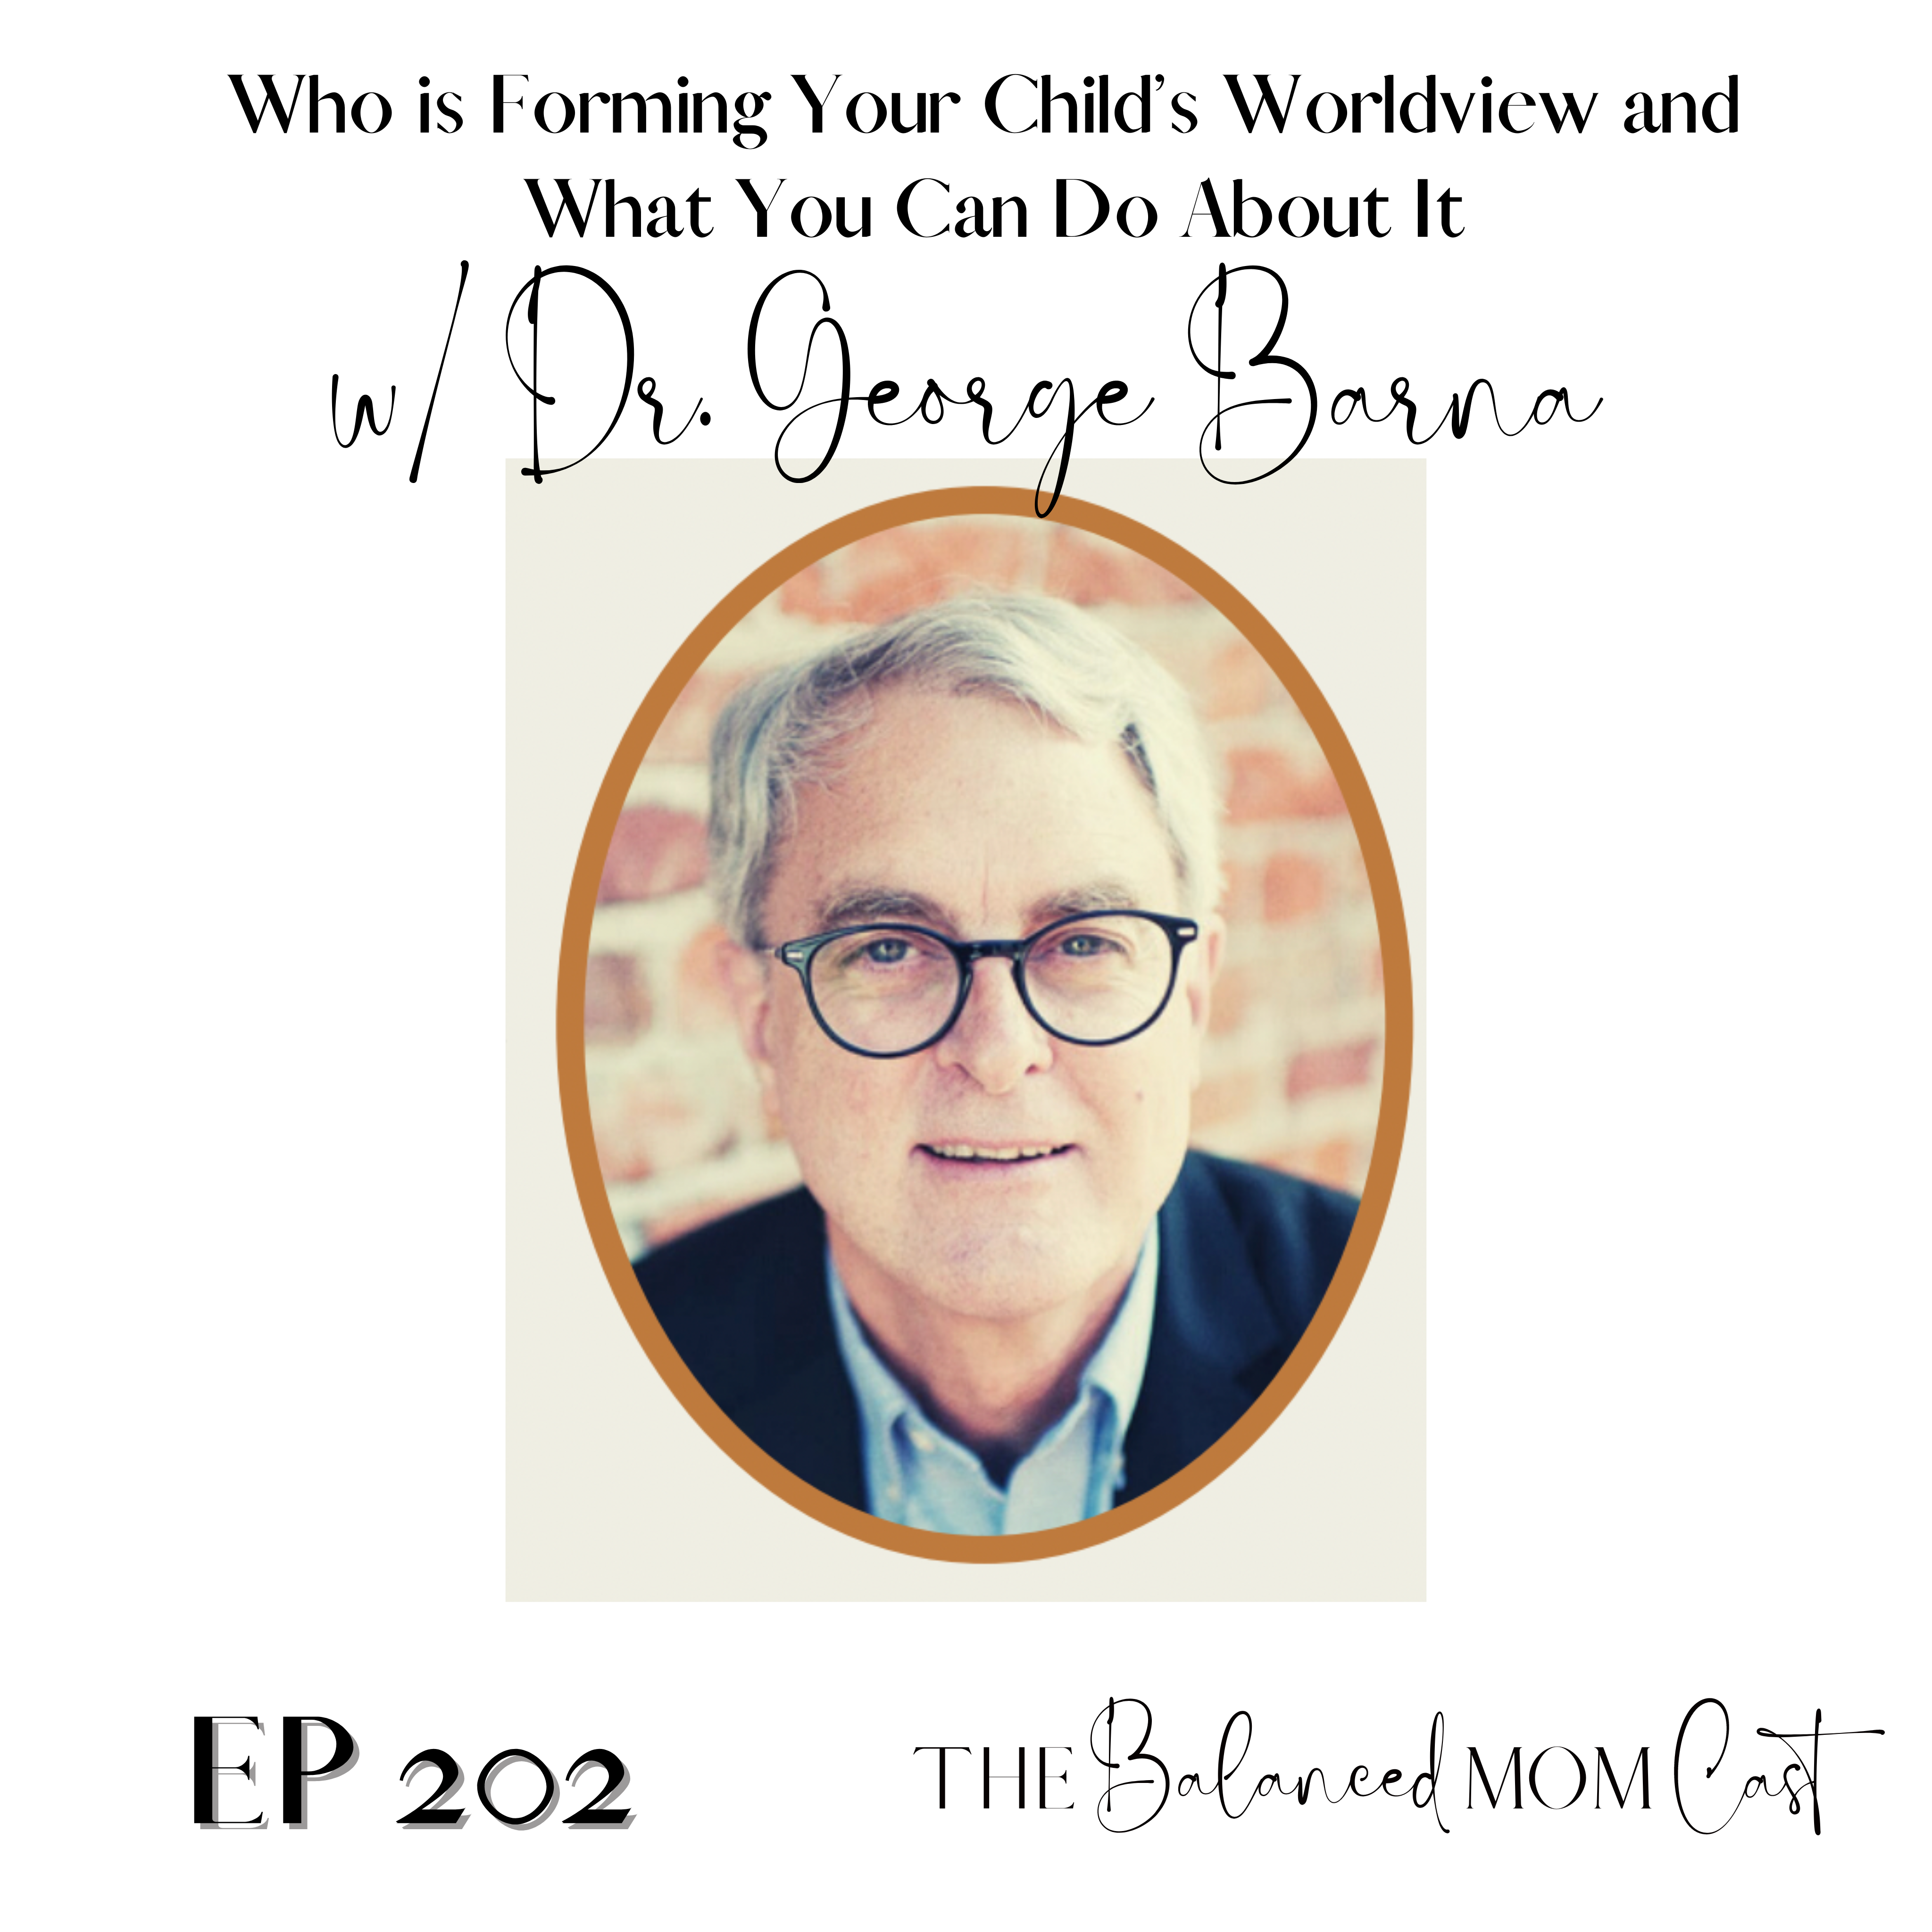 Ep 202: Who is Forming Your Child’s Worldview and What You Can Do About It, w/Dr. George Barna, Pt.2